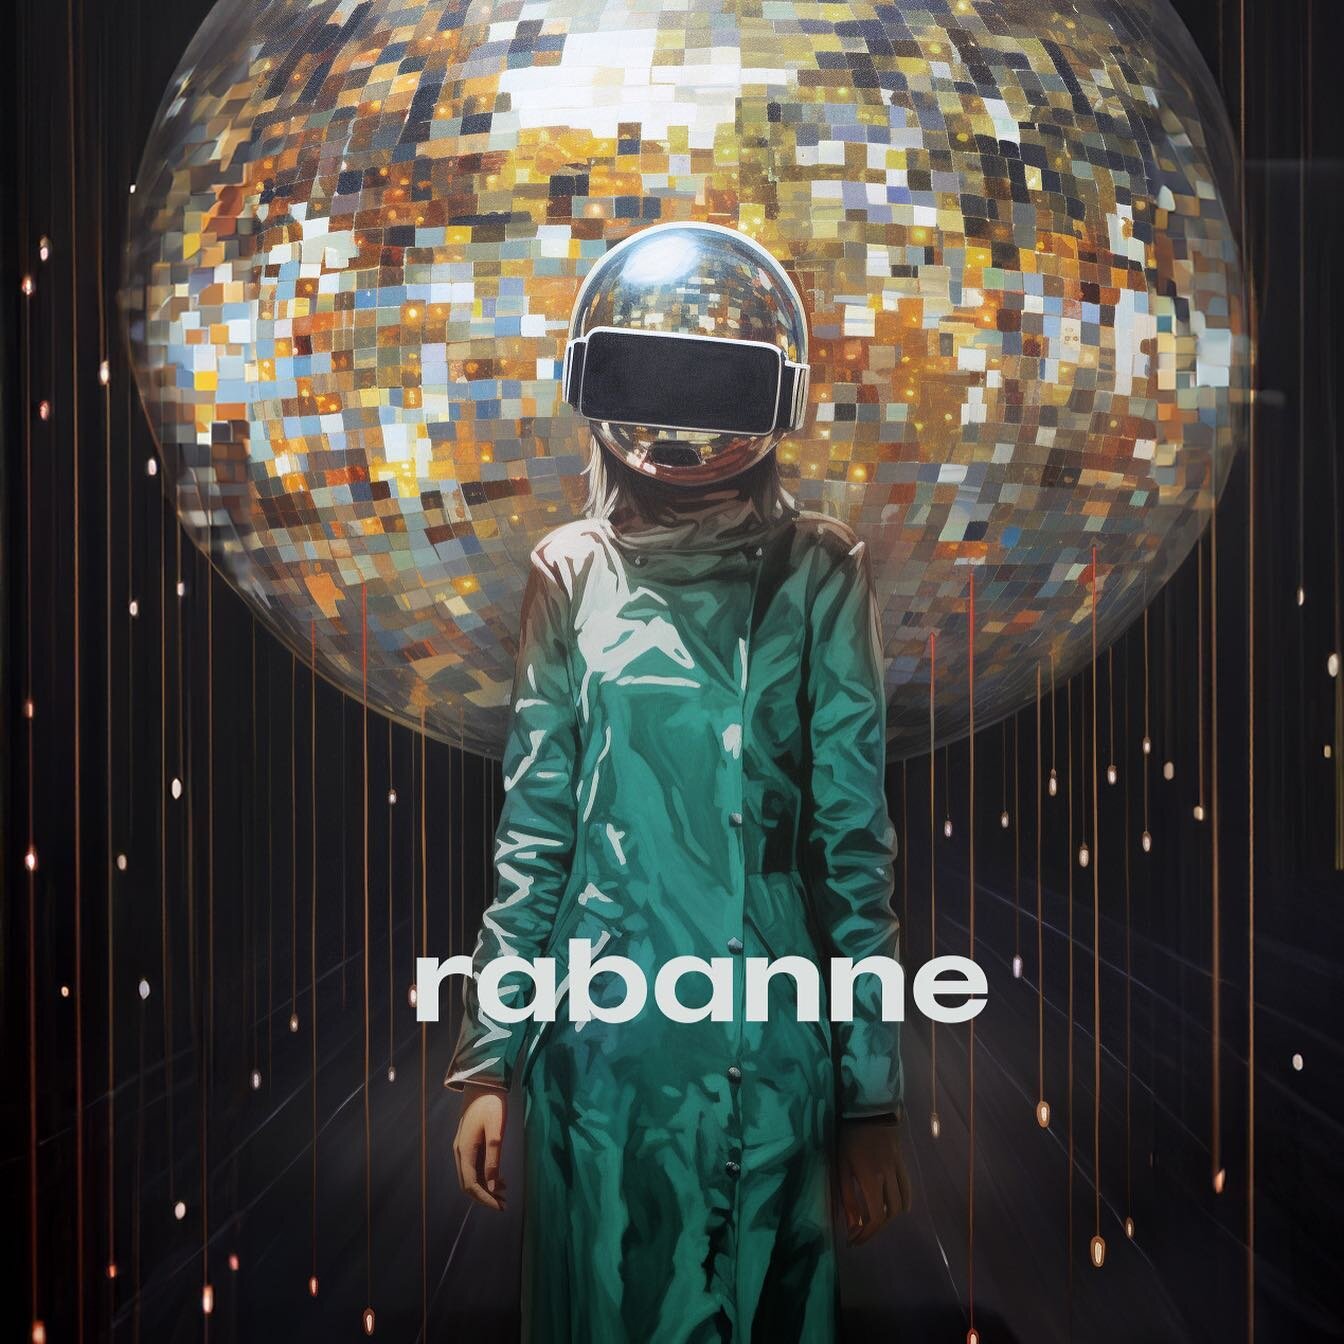 rabanne - a retromodern disco campaign 🥽🪩

a nod to the king of space age fashion materials and aesthetics  #pacorabanne

🎬an AI edit from issue 12 by @zinabaker_